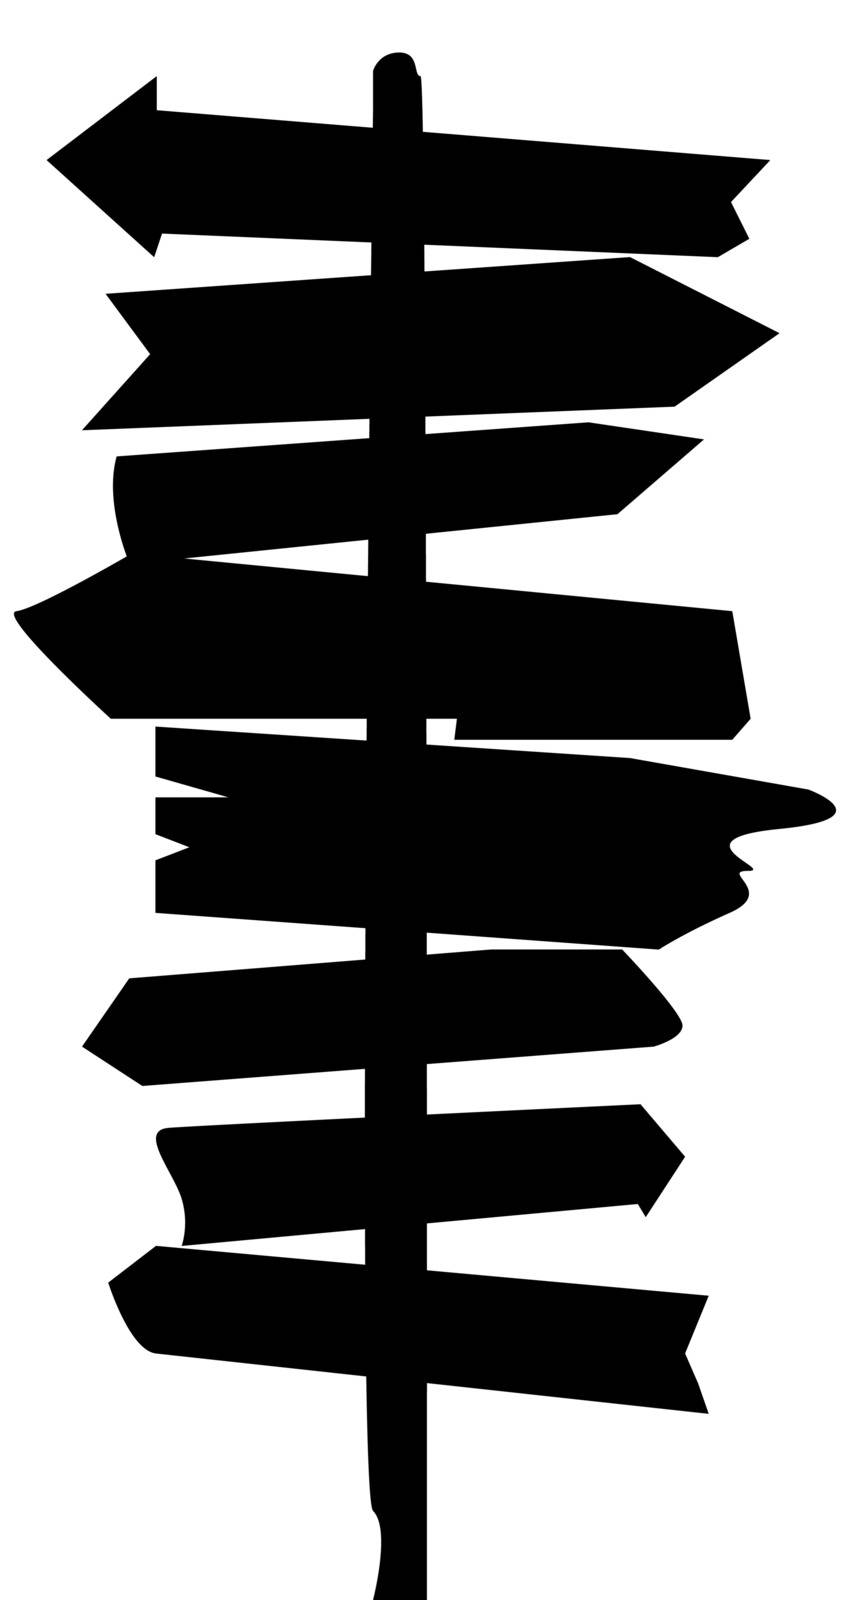 A silhouette of a multi signed post isolated on a white background